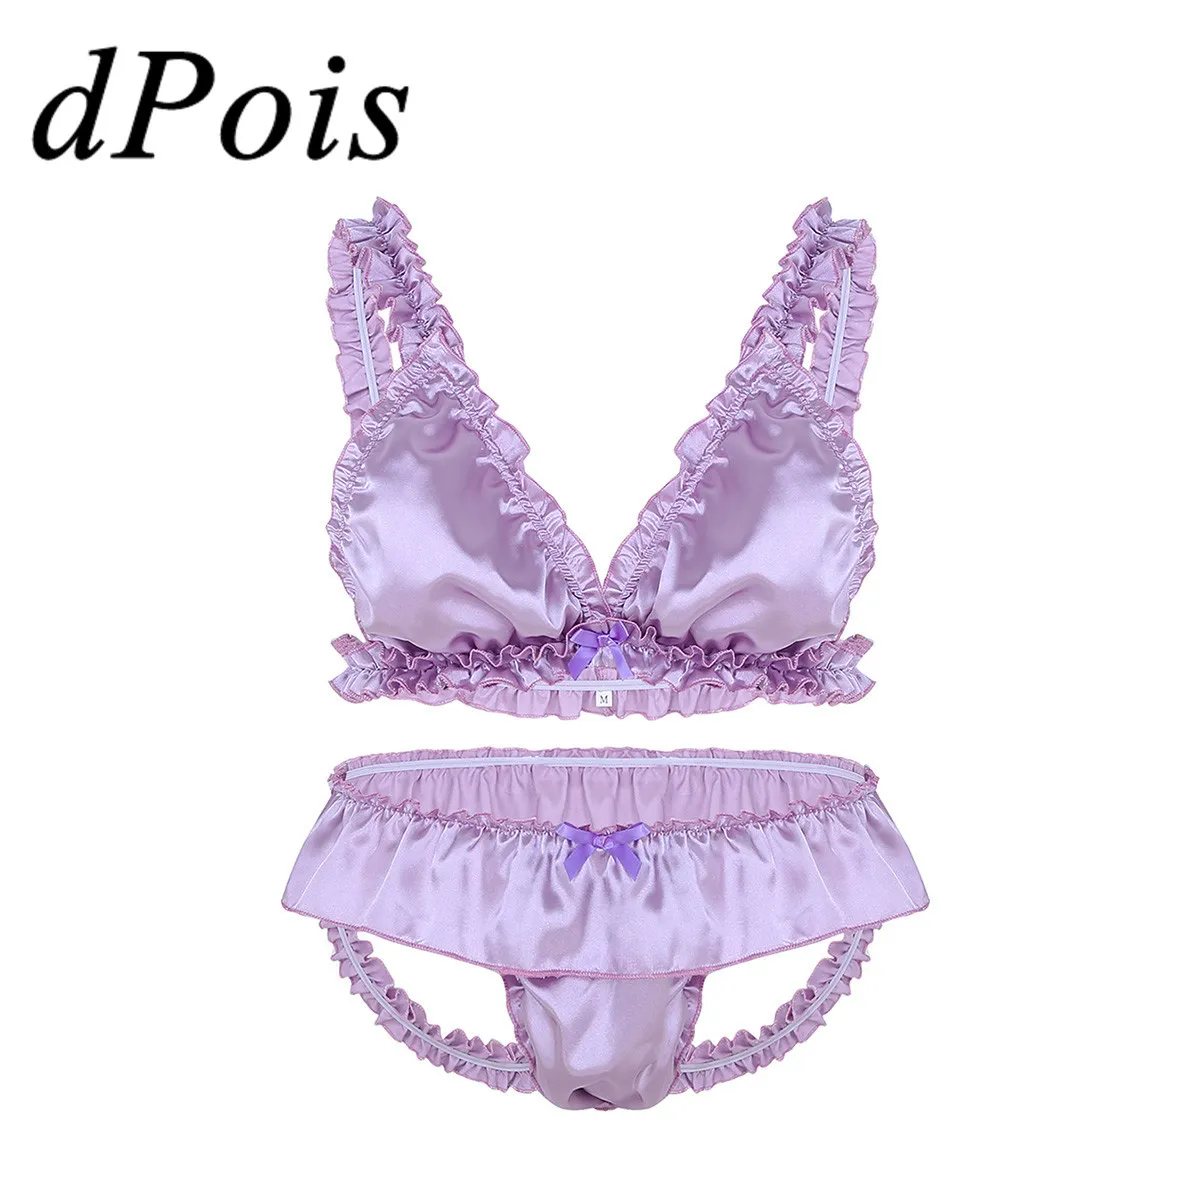 Mens Erotic Lingerie Set Soft Frilly Bra Top And Bare Bum Briefs, Cross  Dress, Mens Sexy Outfits From Dang09, $13.77